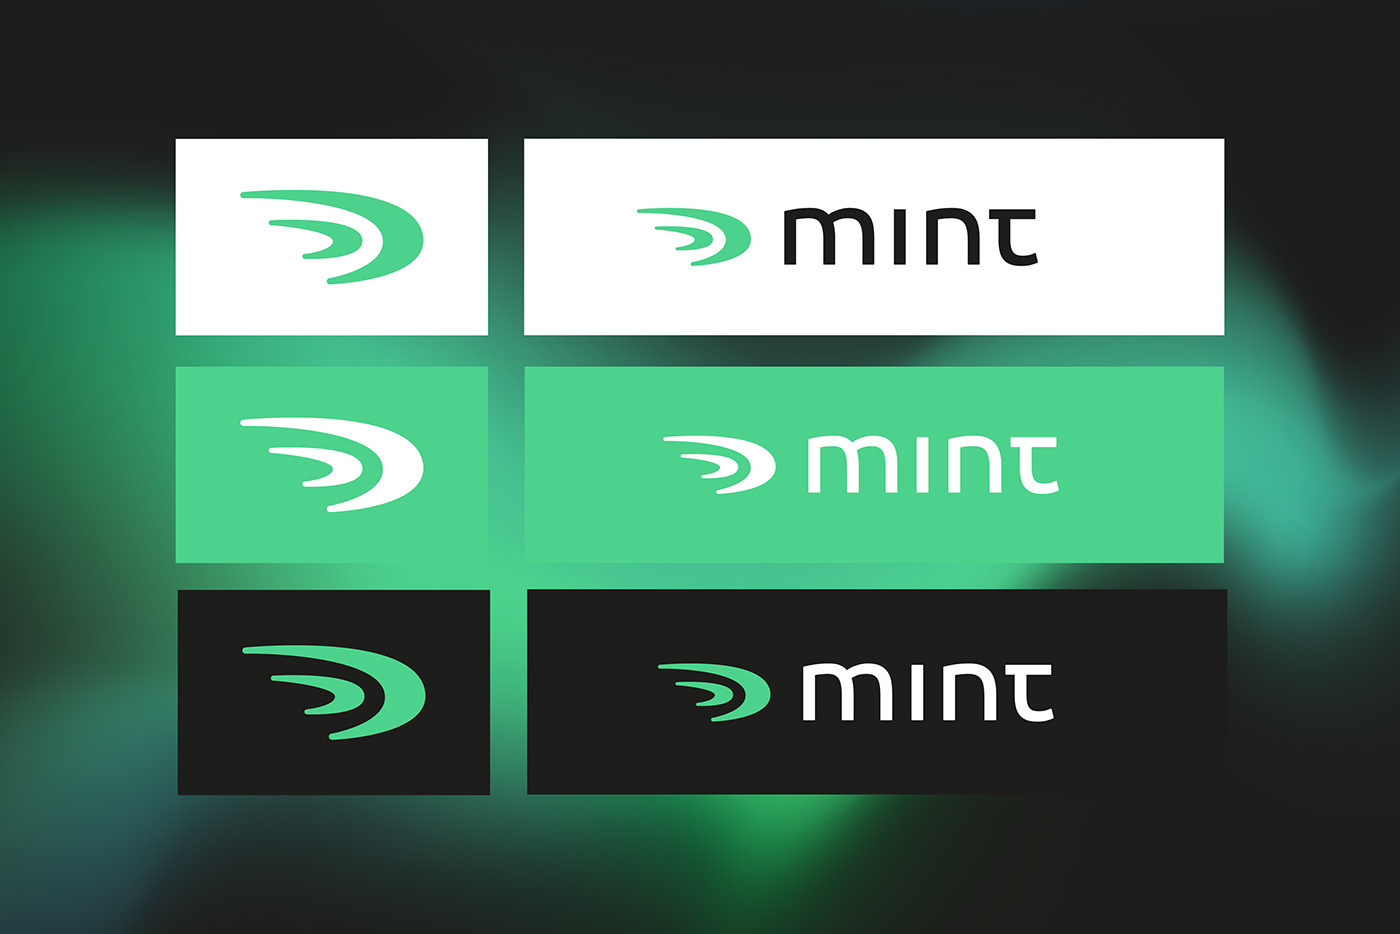 Logo versions on different colors 